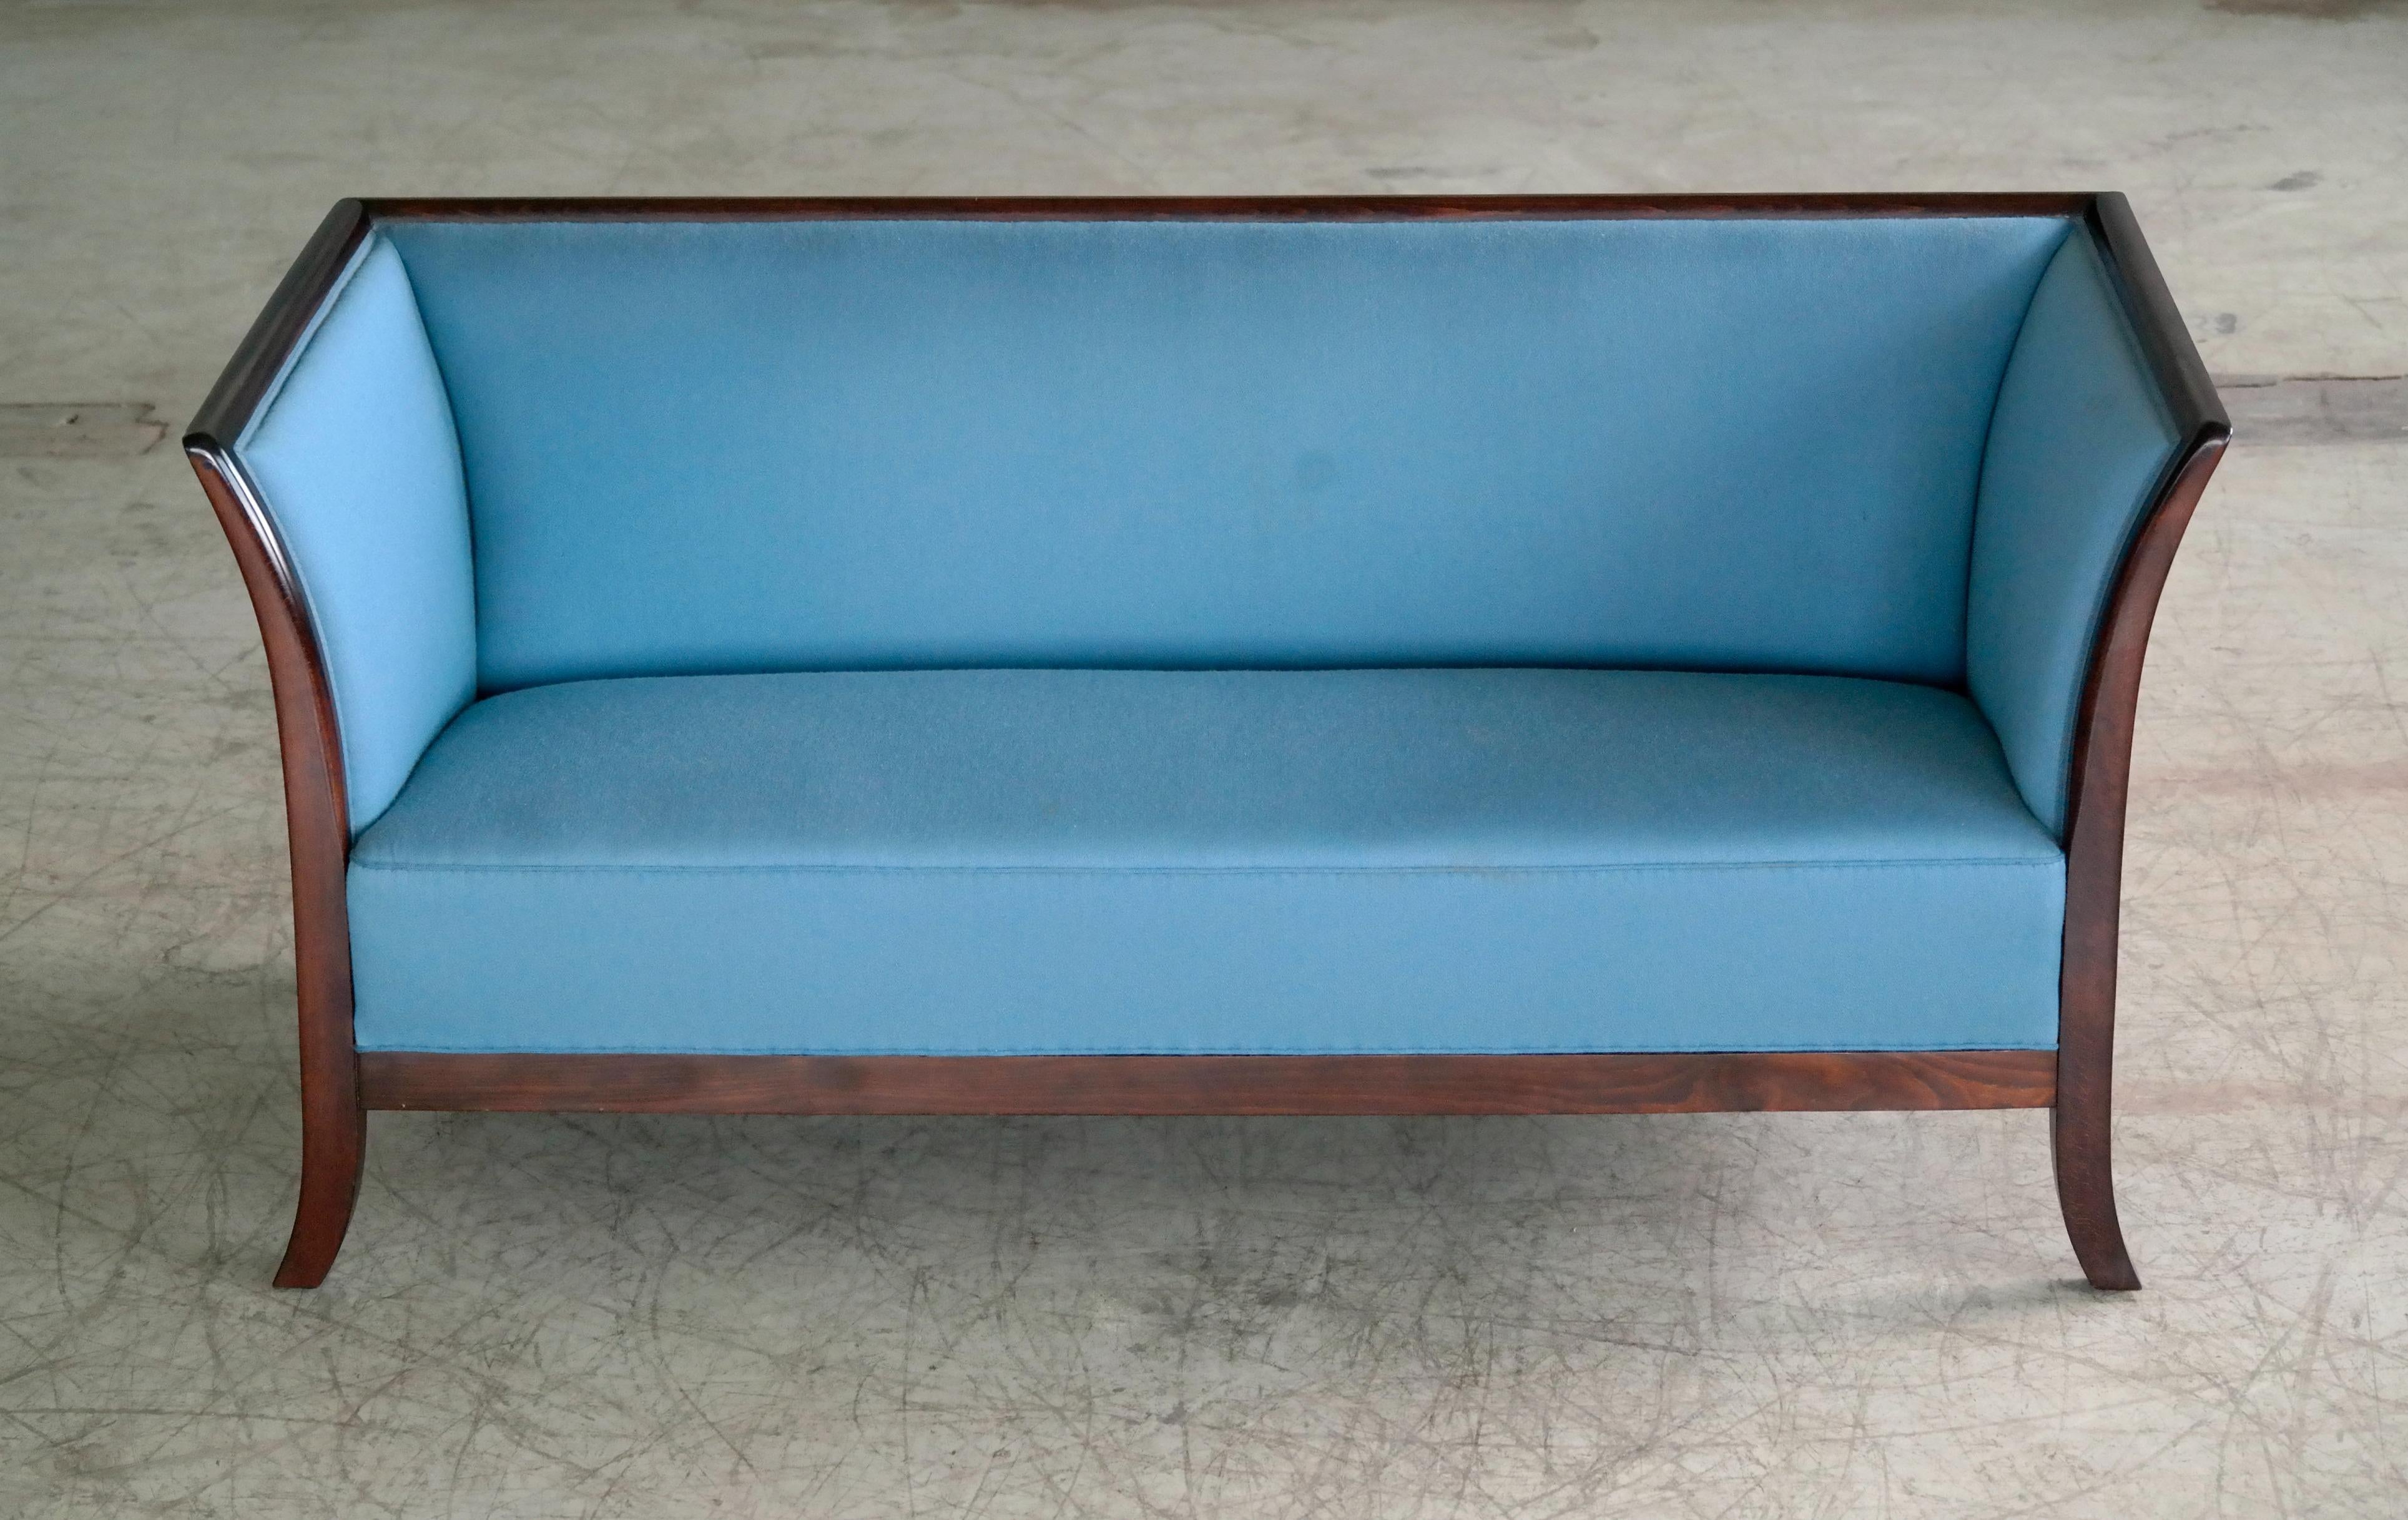 Beautiful and very elegant Frits Henningsen style sofa manufactured and marked with label by Søren Willadsen, one of Denmark's premiere furniture makers sometime in the early 1950s. Solid mahogany frame extending into flared legs. Later